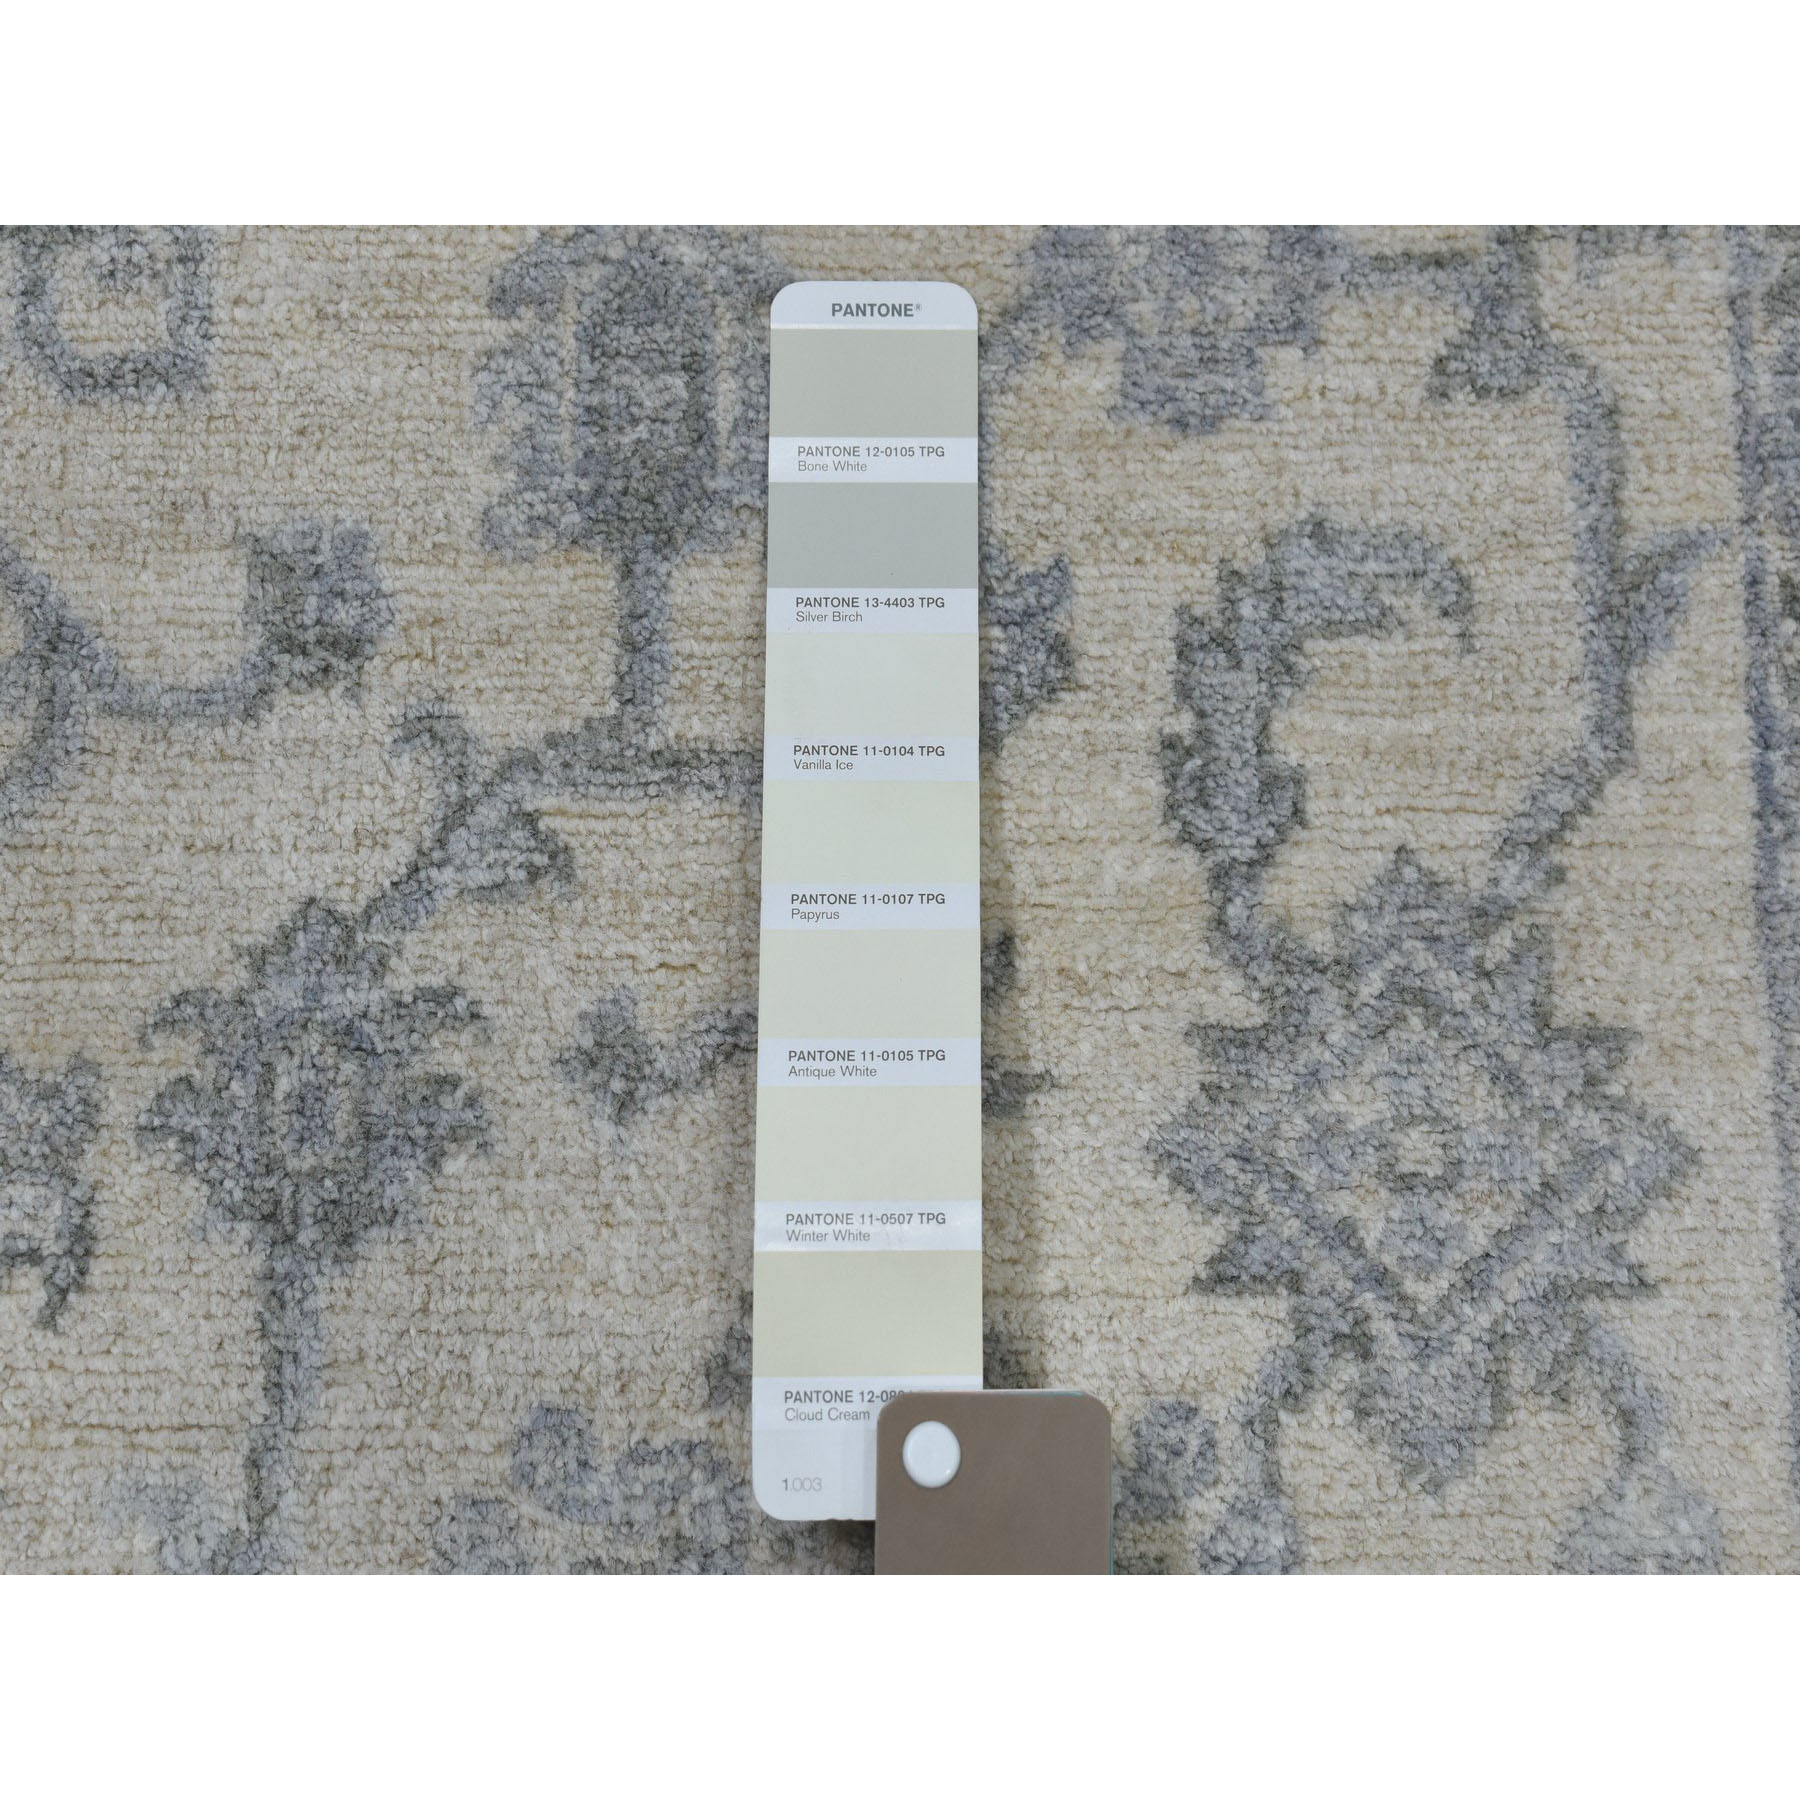 4-x6- White Wash Peshawar Pure Wool Hand-Knotted Oriental Rug 